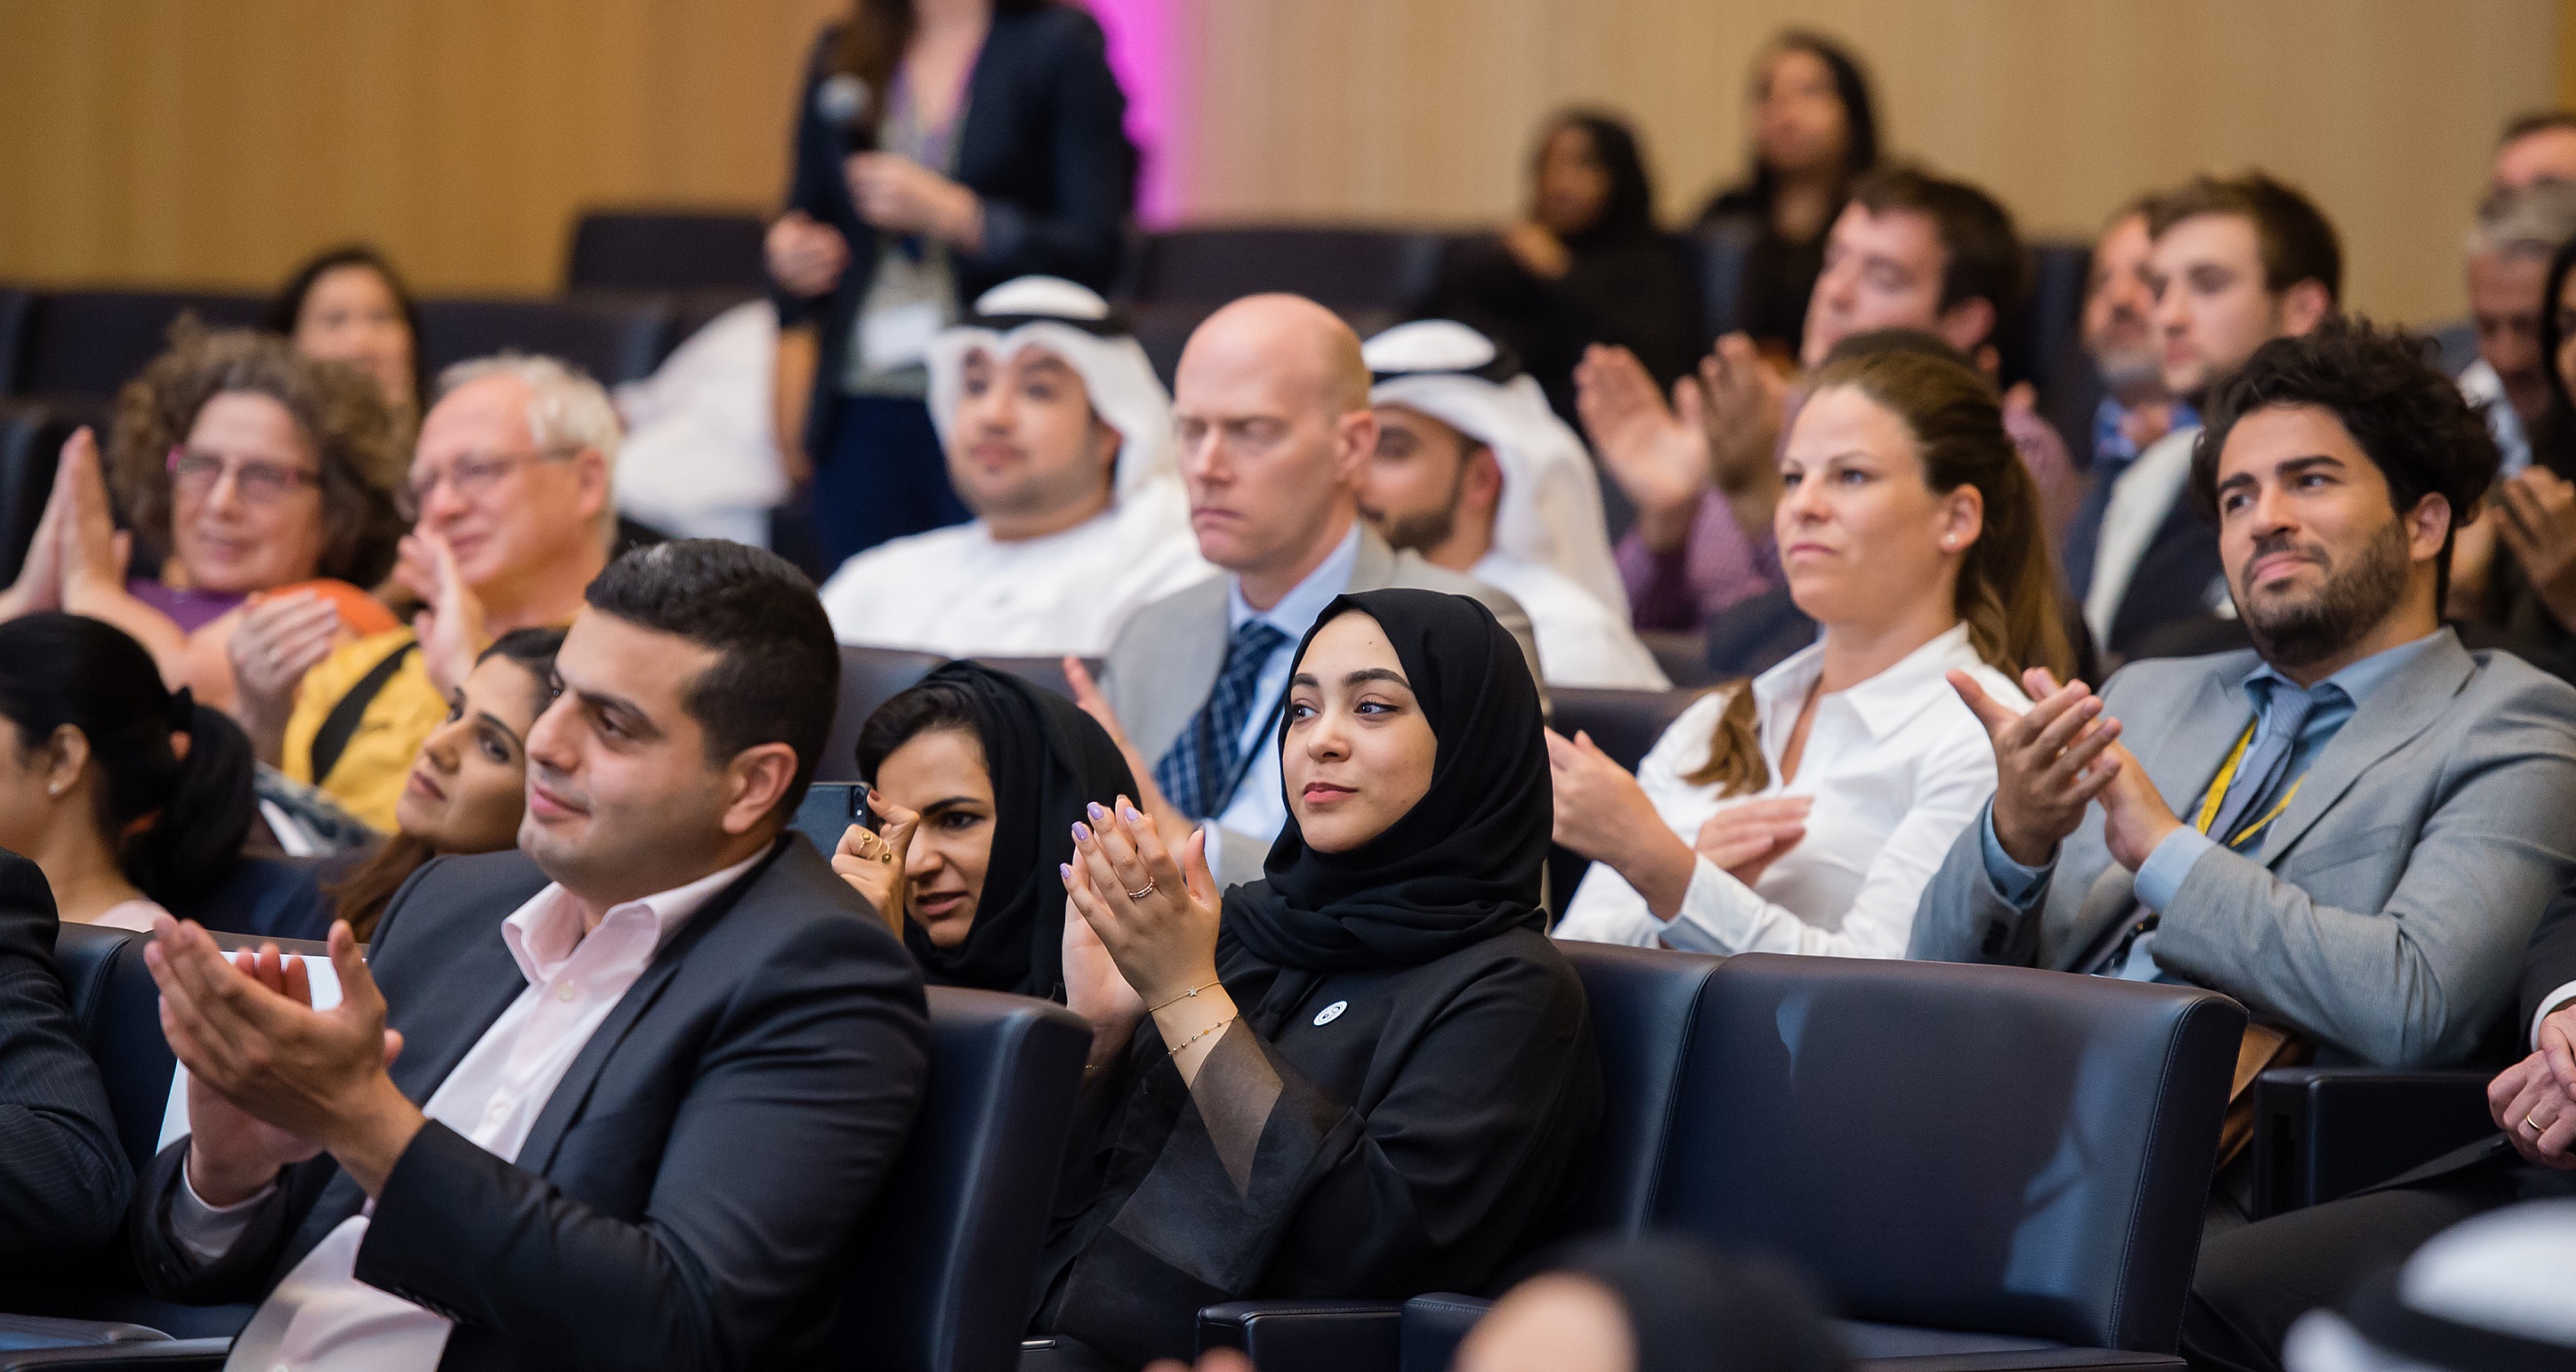 GCC-Based Entities Join Forces To Launch Region’s First Conscious Investor Fellowship